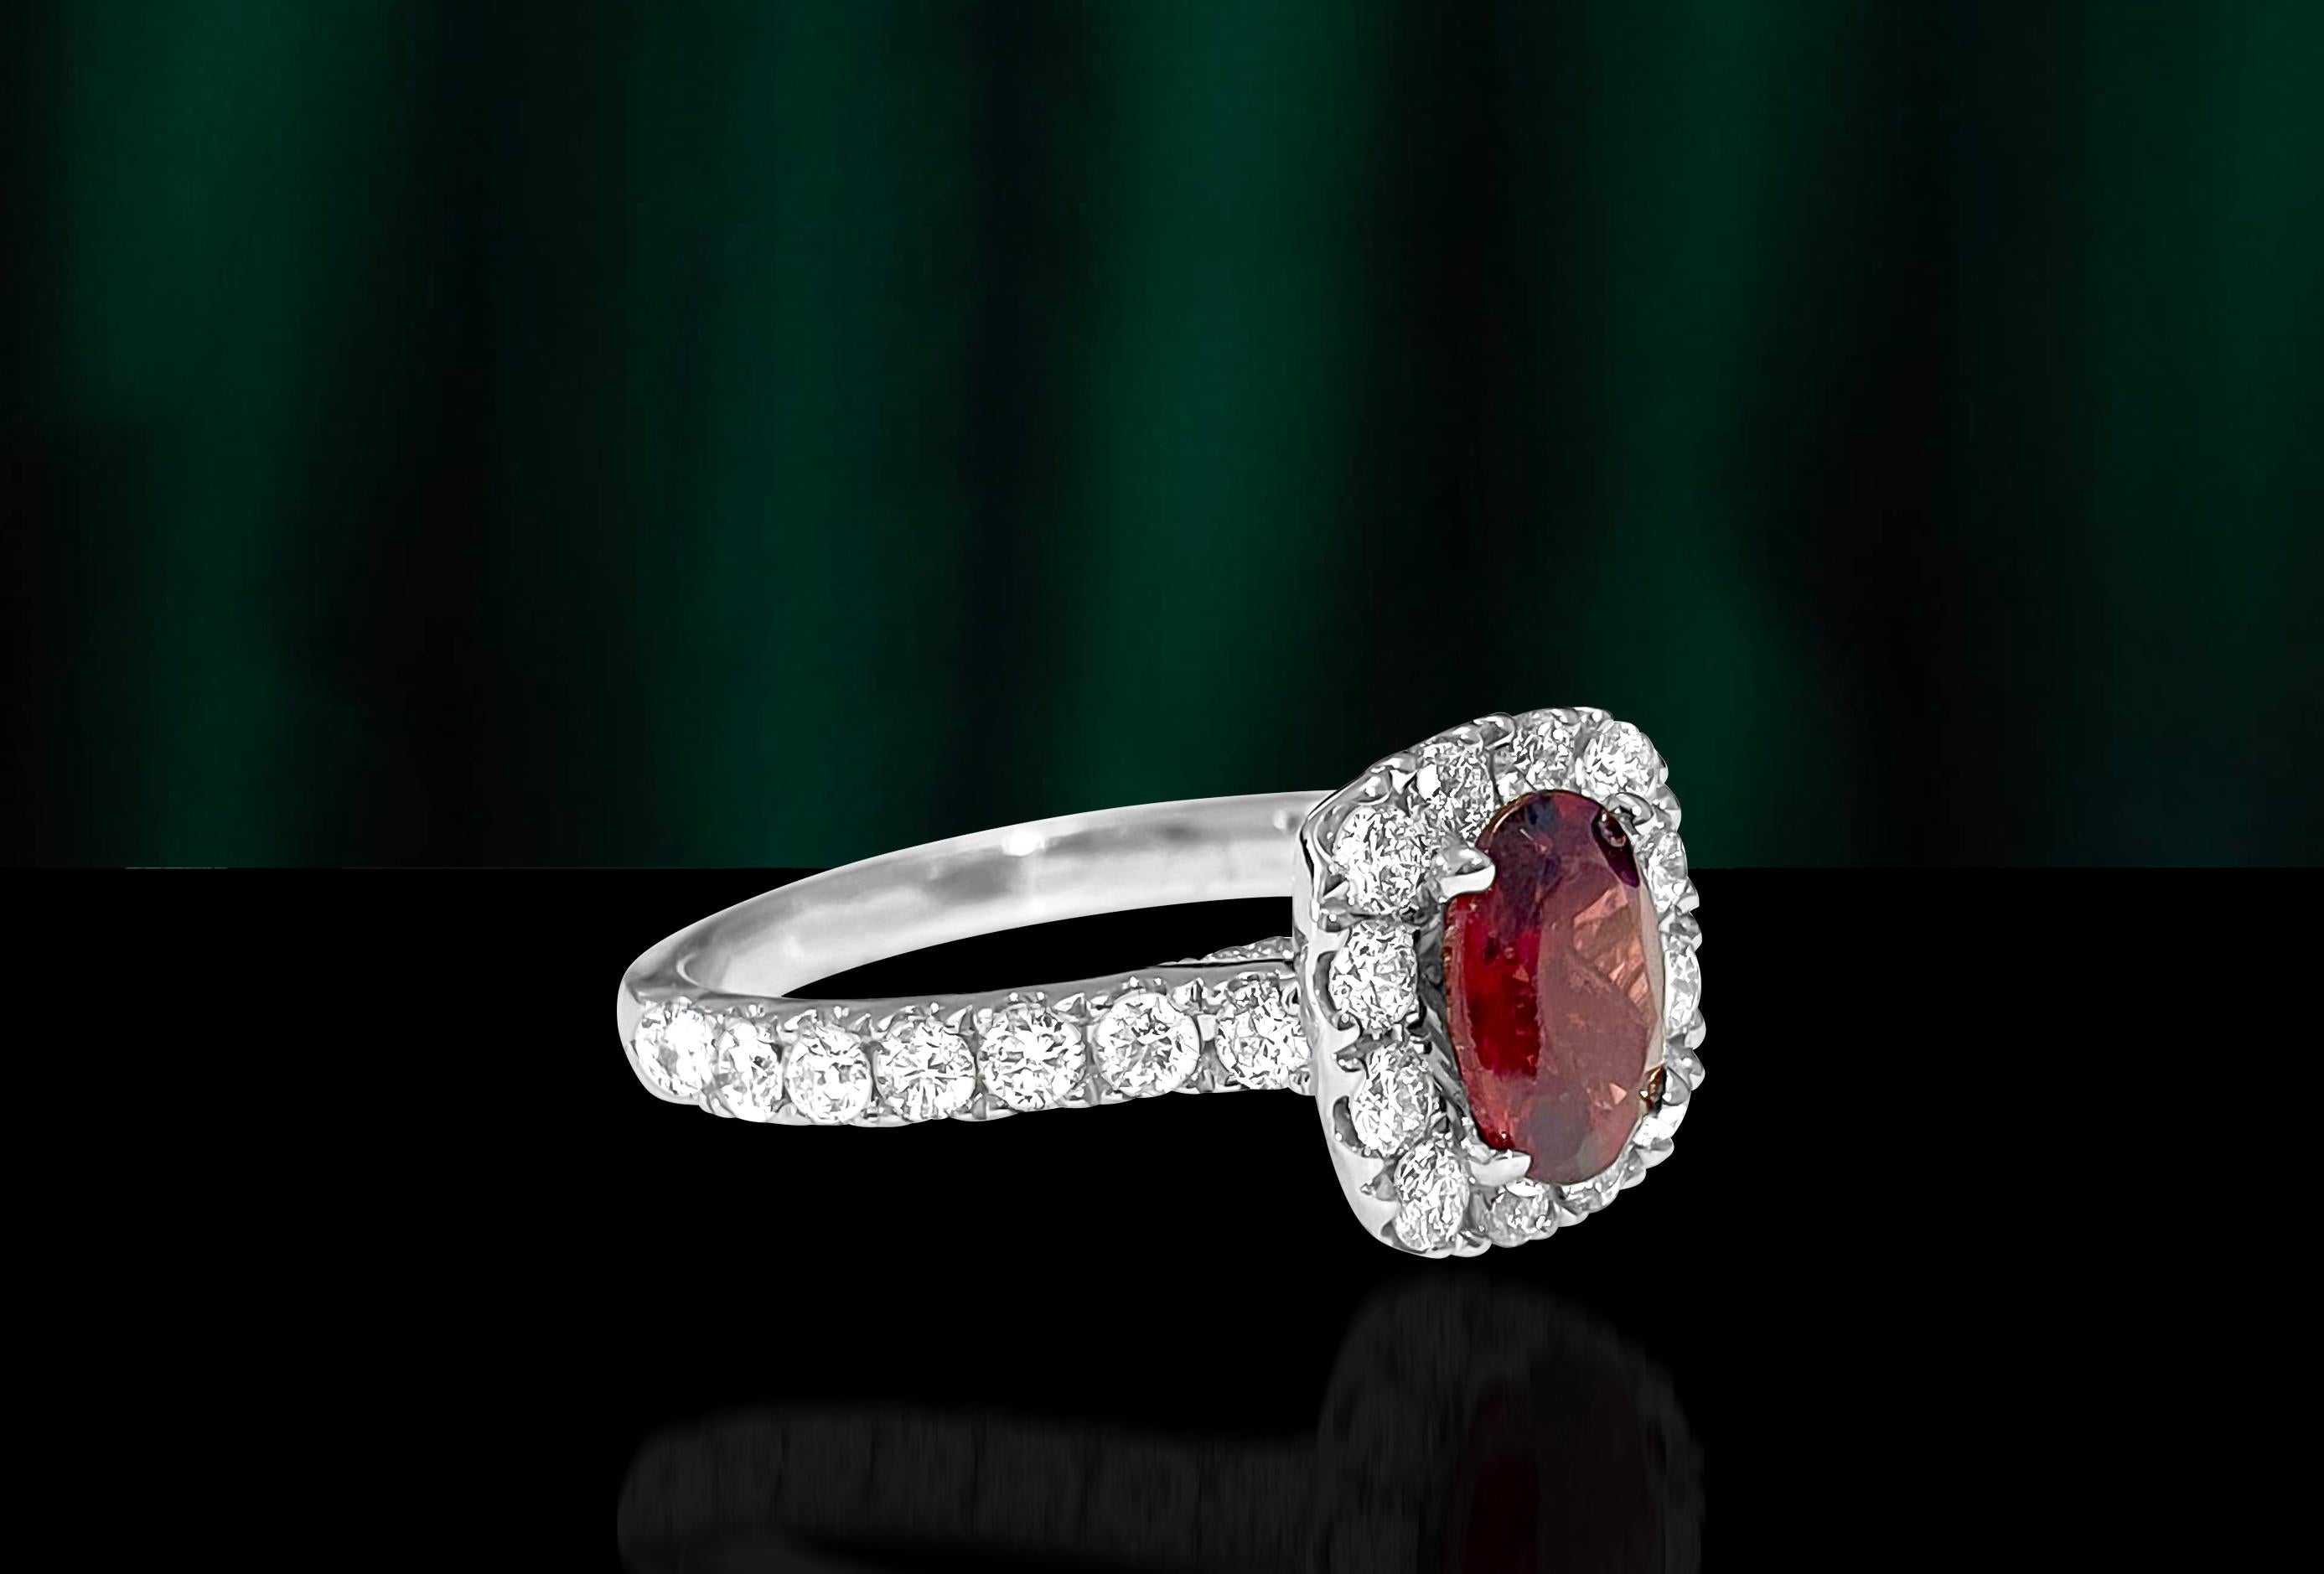 Metal: 14k white gold. 
Diamonds: 1.20cts total. Round brilliant cut. VS-SI clarity. G color. 
Garnet: Oval shape set in prongs. 8x6mm. 1.20cts approx. 
Total carat weight of all gemstonesL 2.40 Carats. 
Total weight of the ring: 4.71 grams